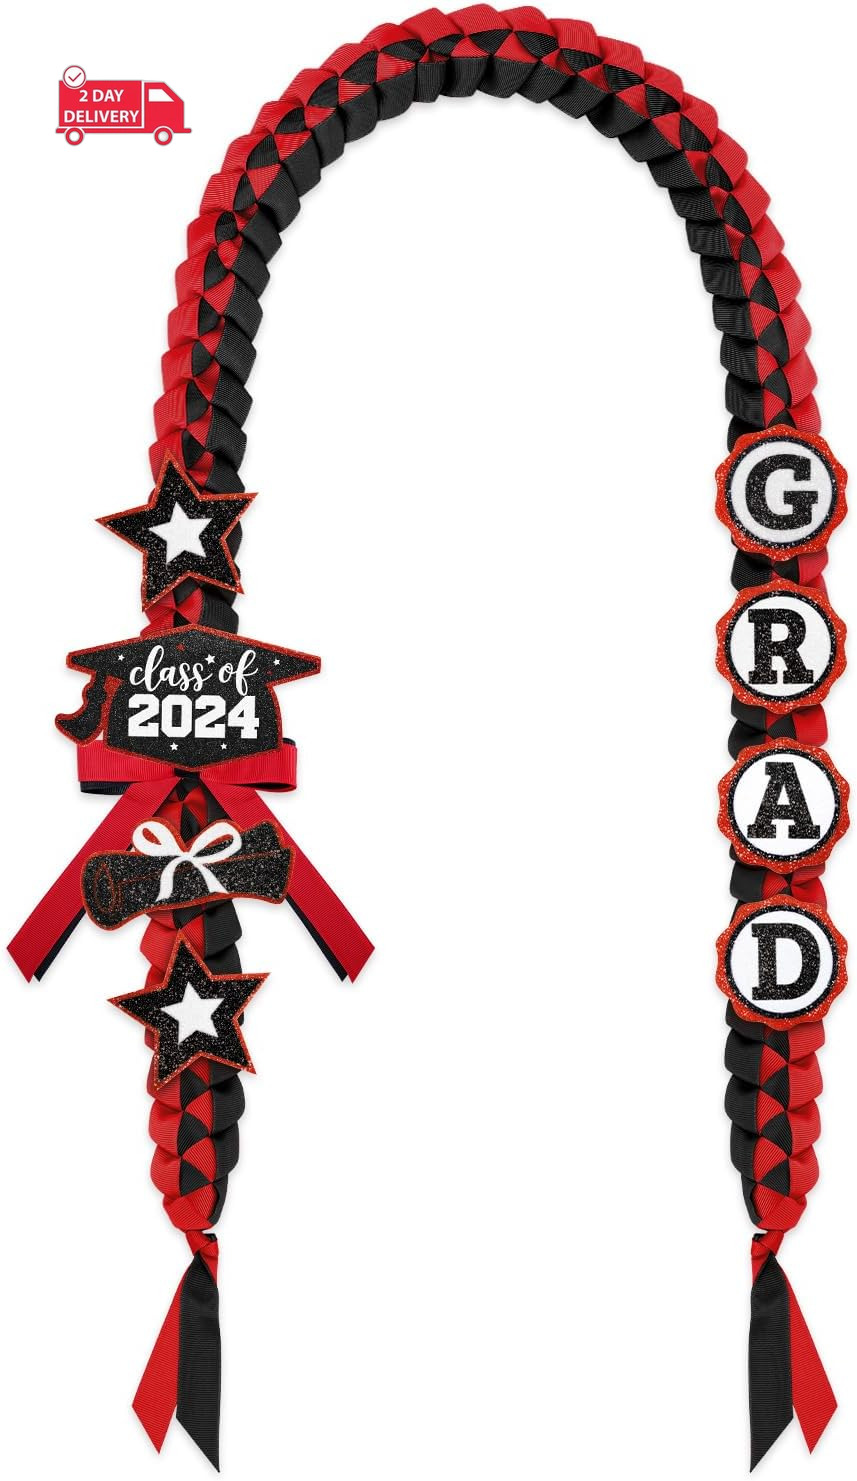 Class of 2024 Graduation Leis with Glitter Pins Handmade Double Braided Ribbon G